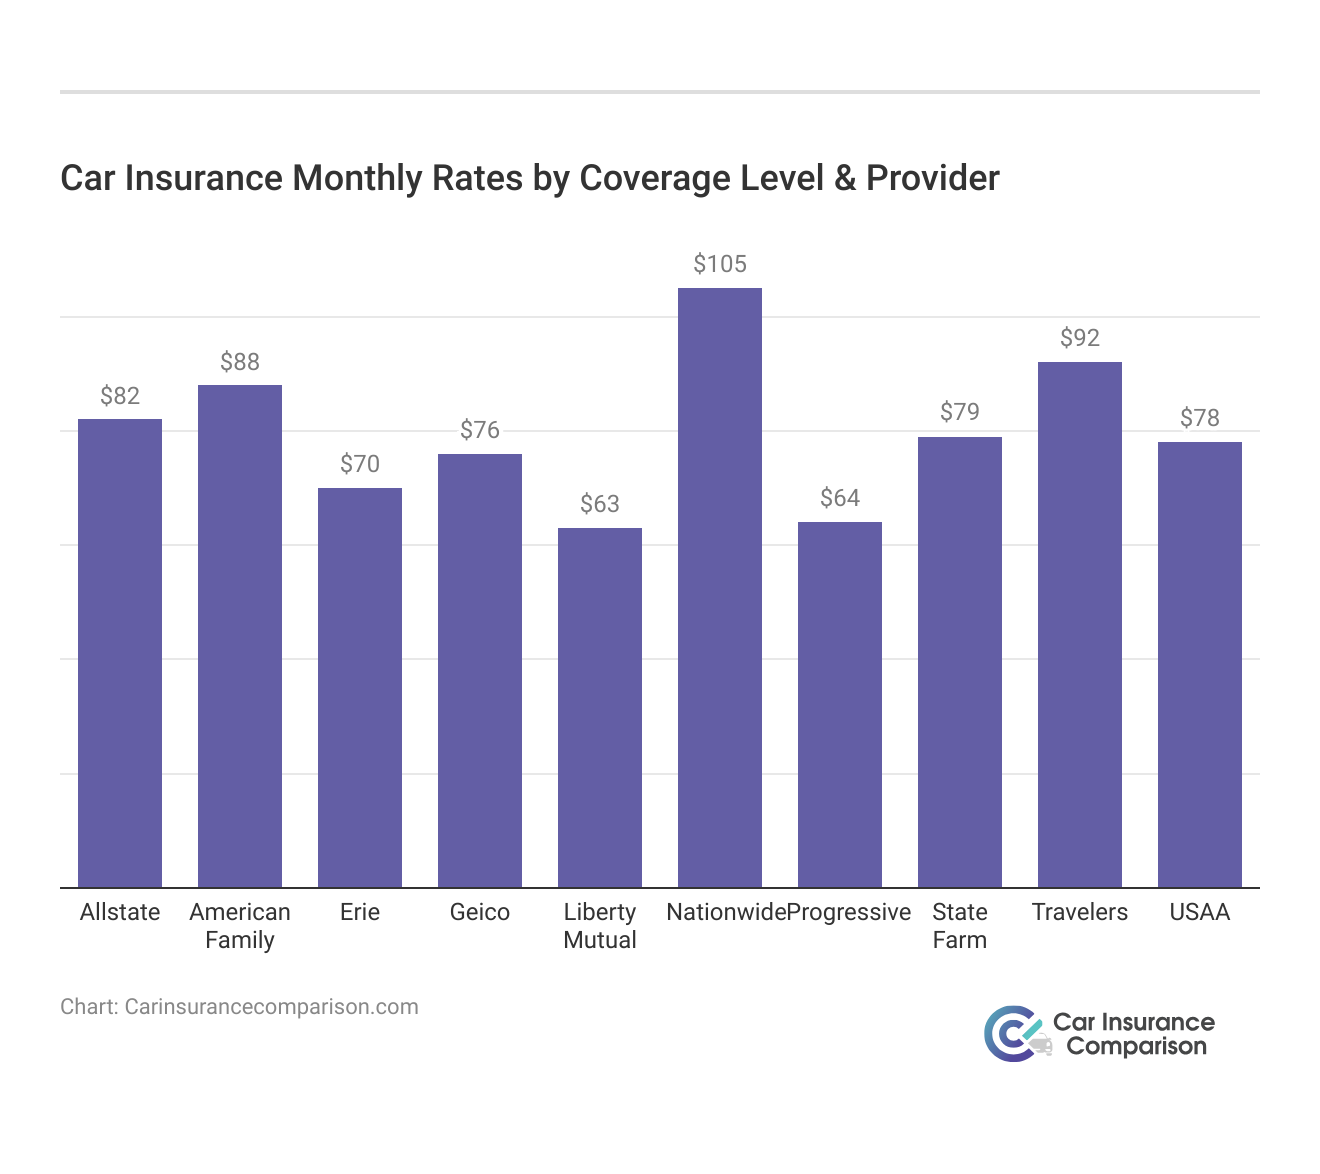 <h3>Car Insurance Monthly Rates by Coverage Level & Provider</h3>